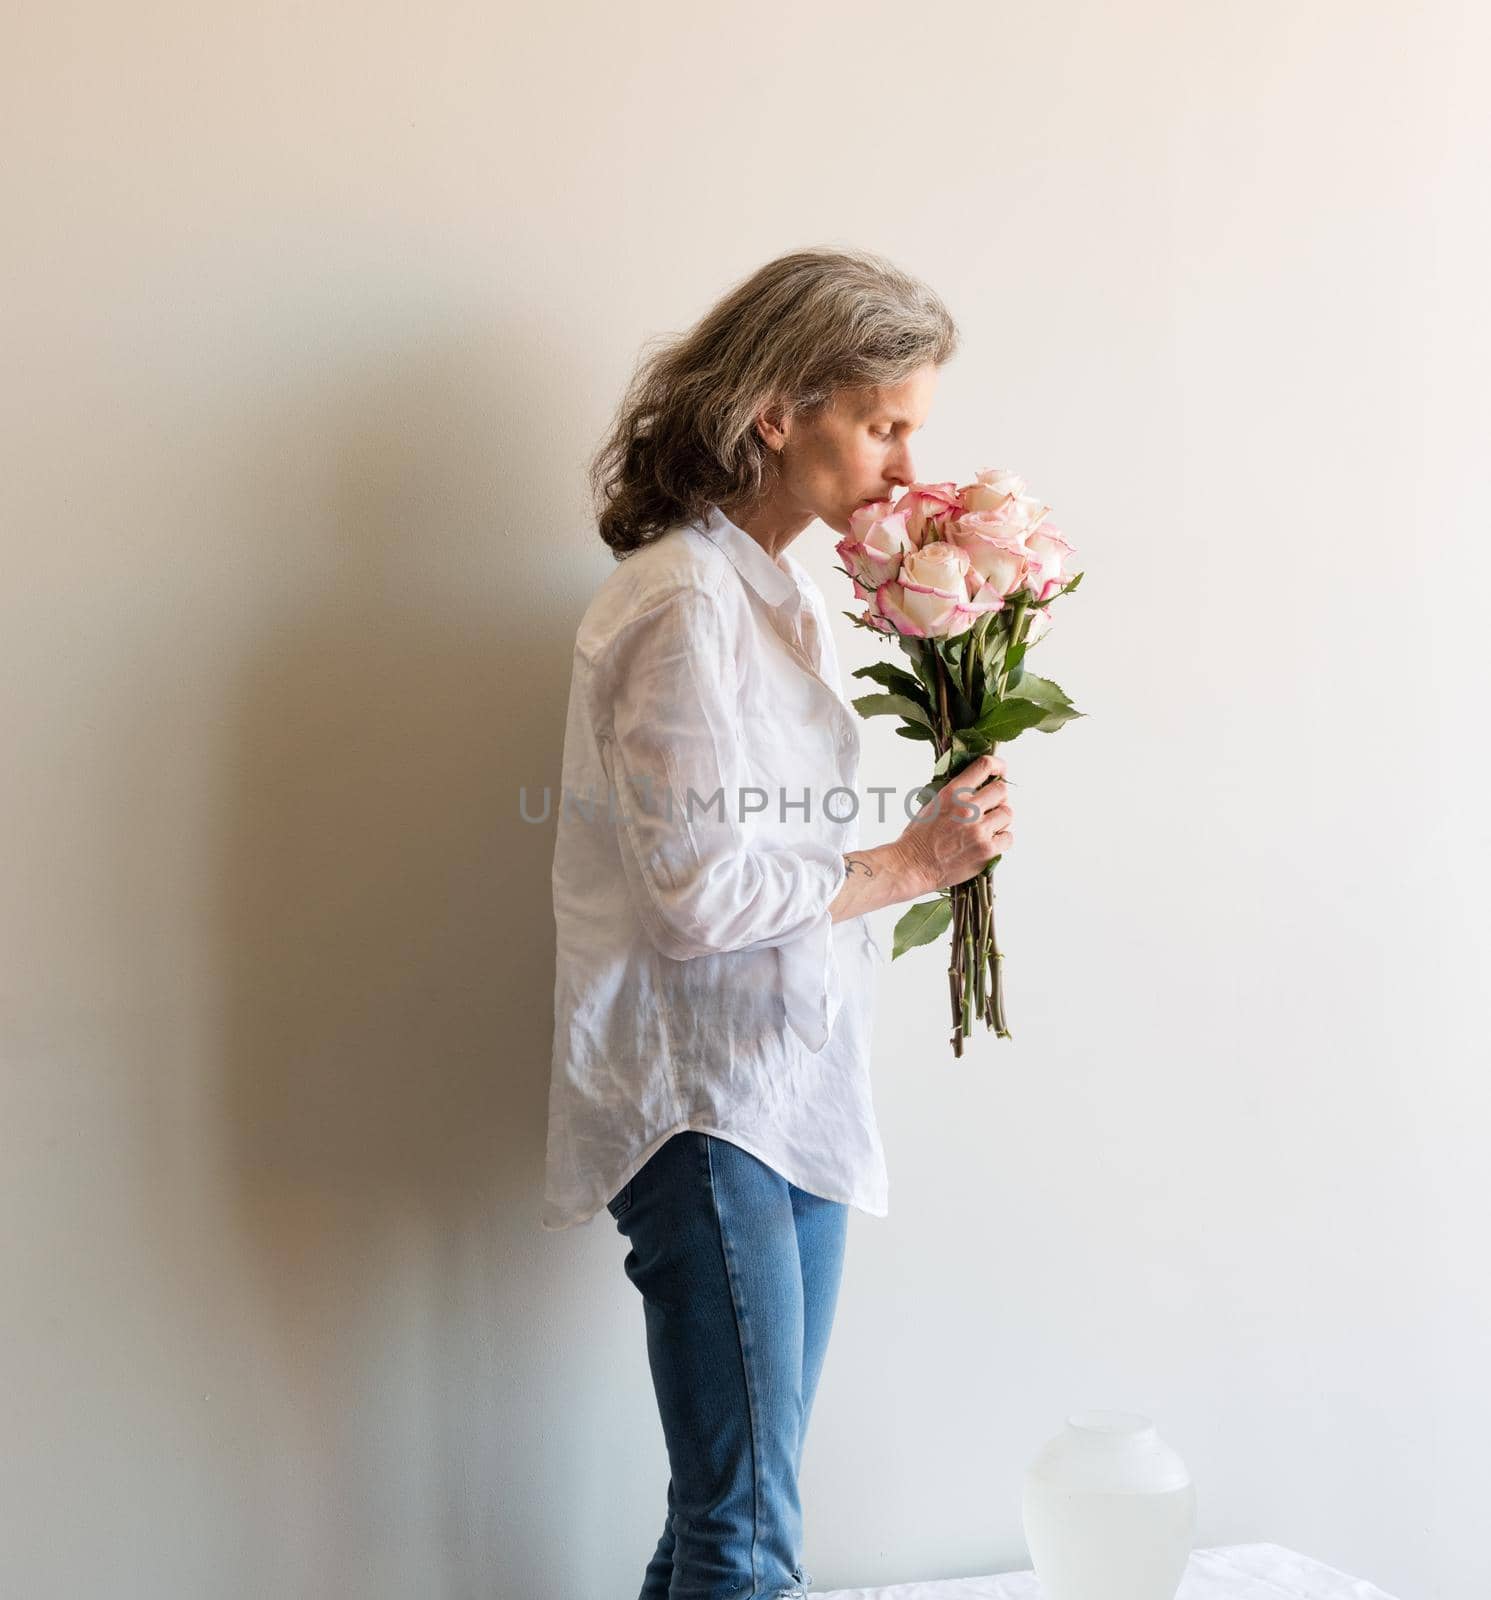 Middle aged woman with grey hair and white shirt smelling pink and cream roses near vase on table